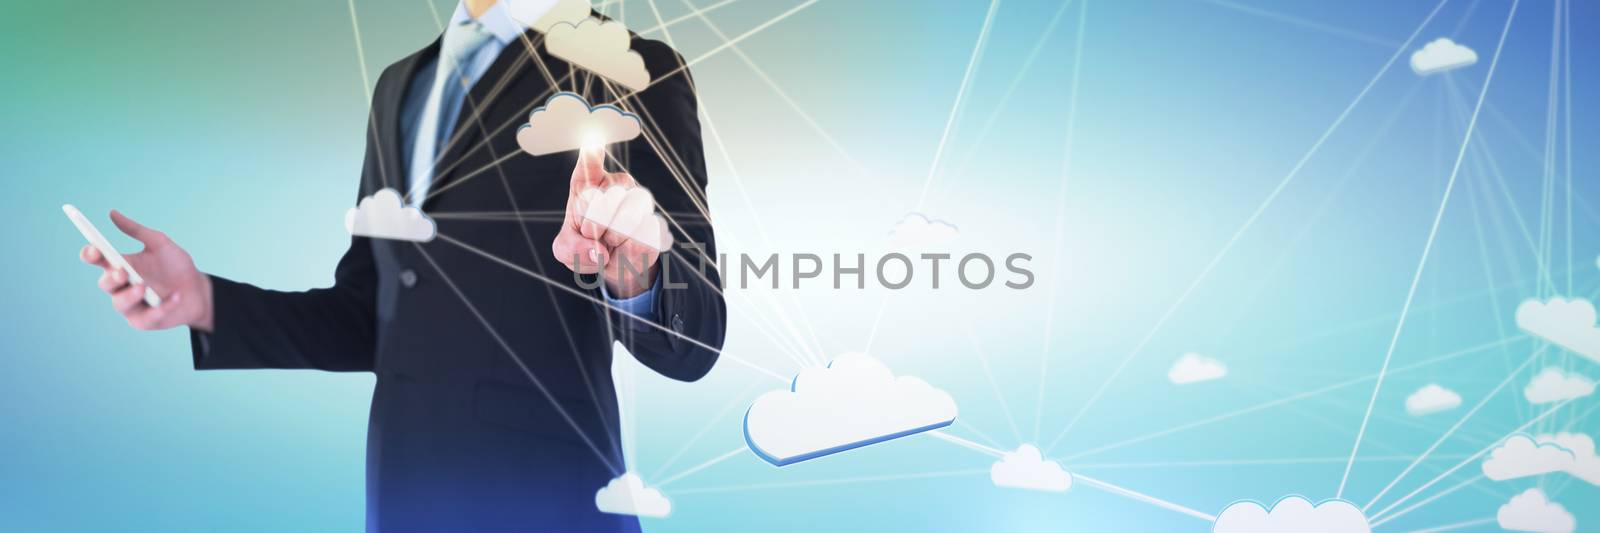 Composite image of mid section of businessman holding mobile phone while using interface screen by Wavebreakmedia